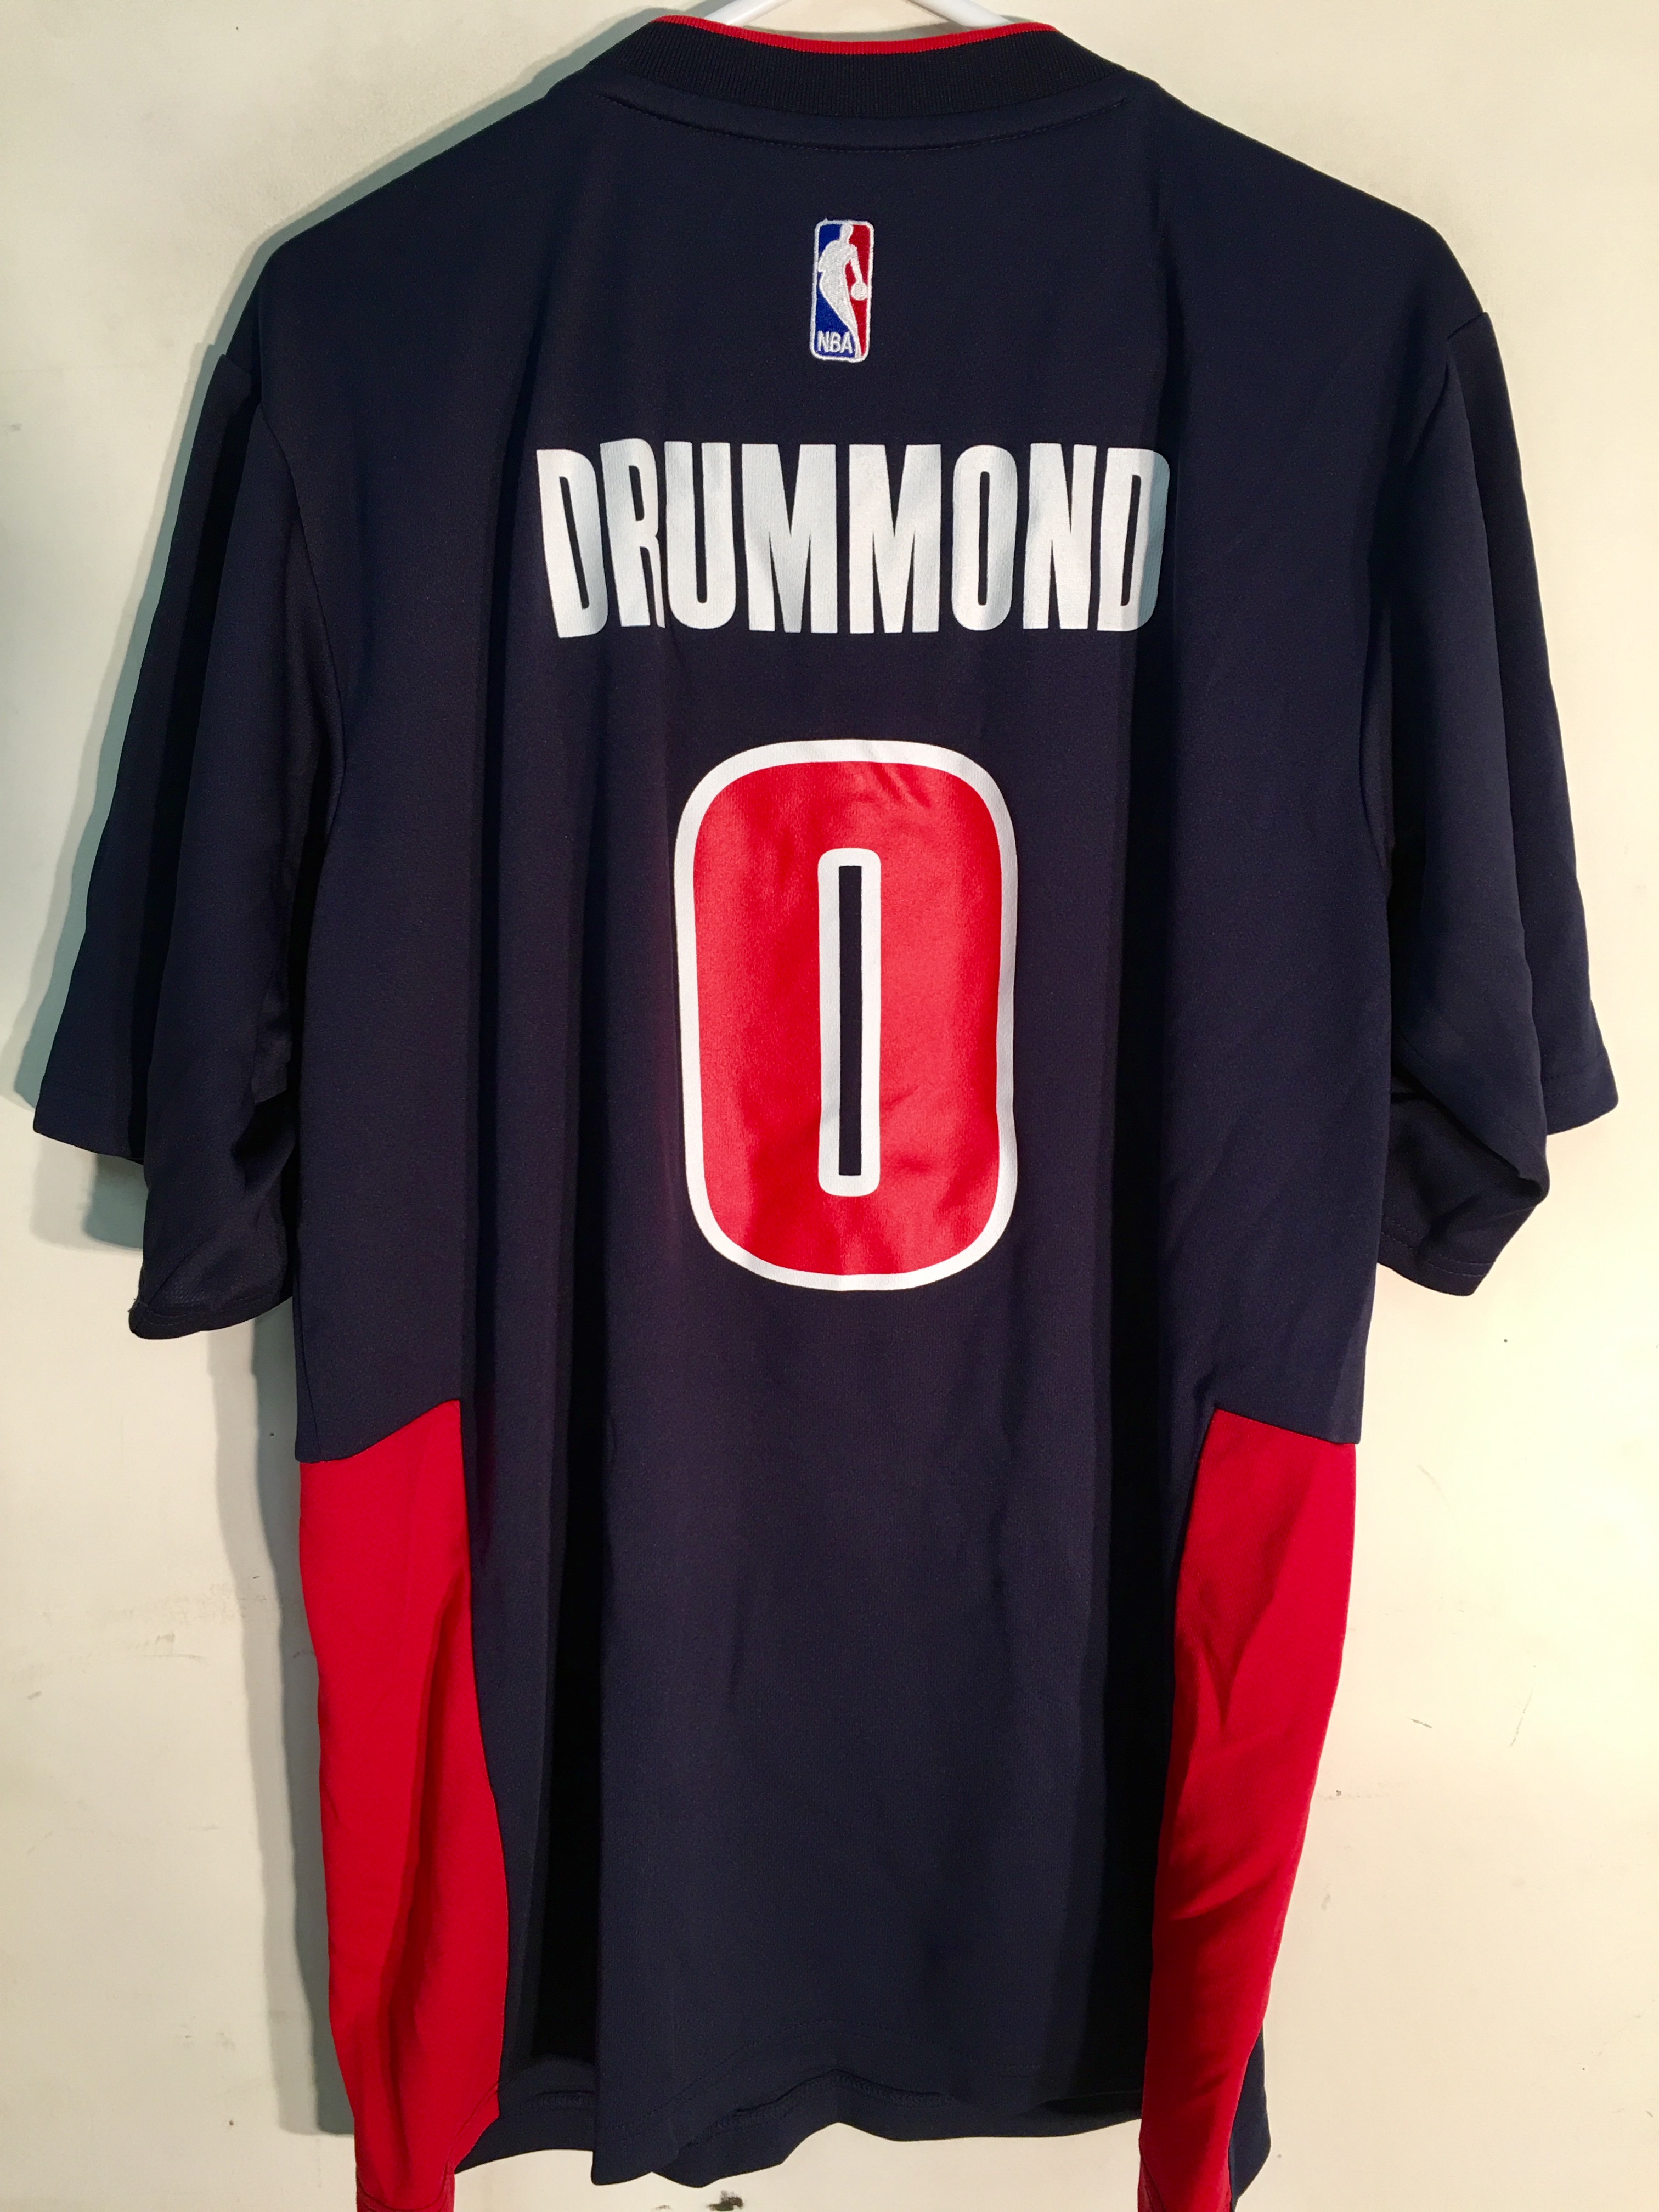 andre drummond usa jersey